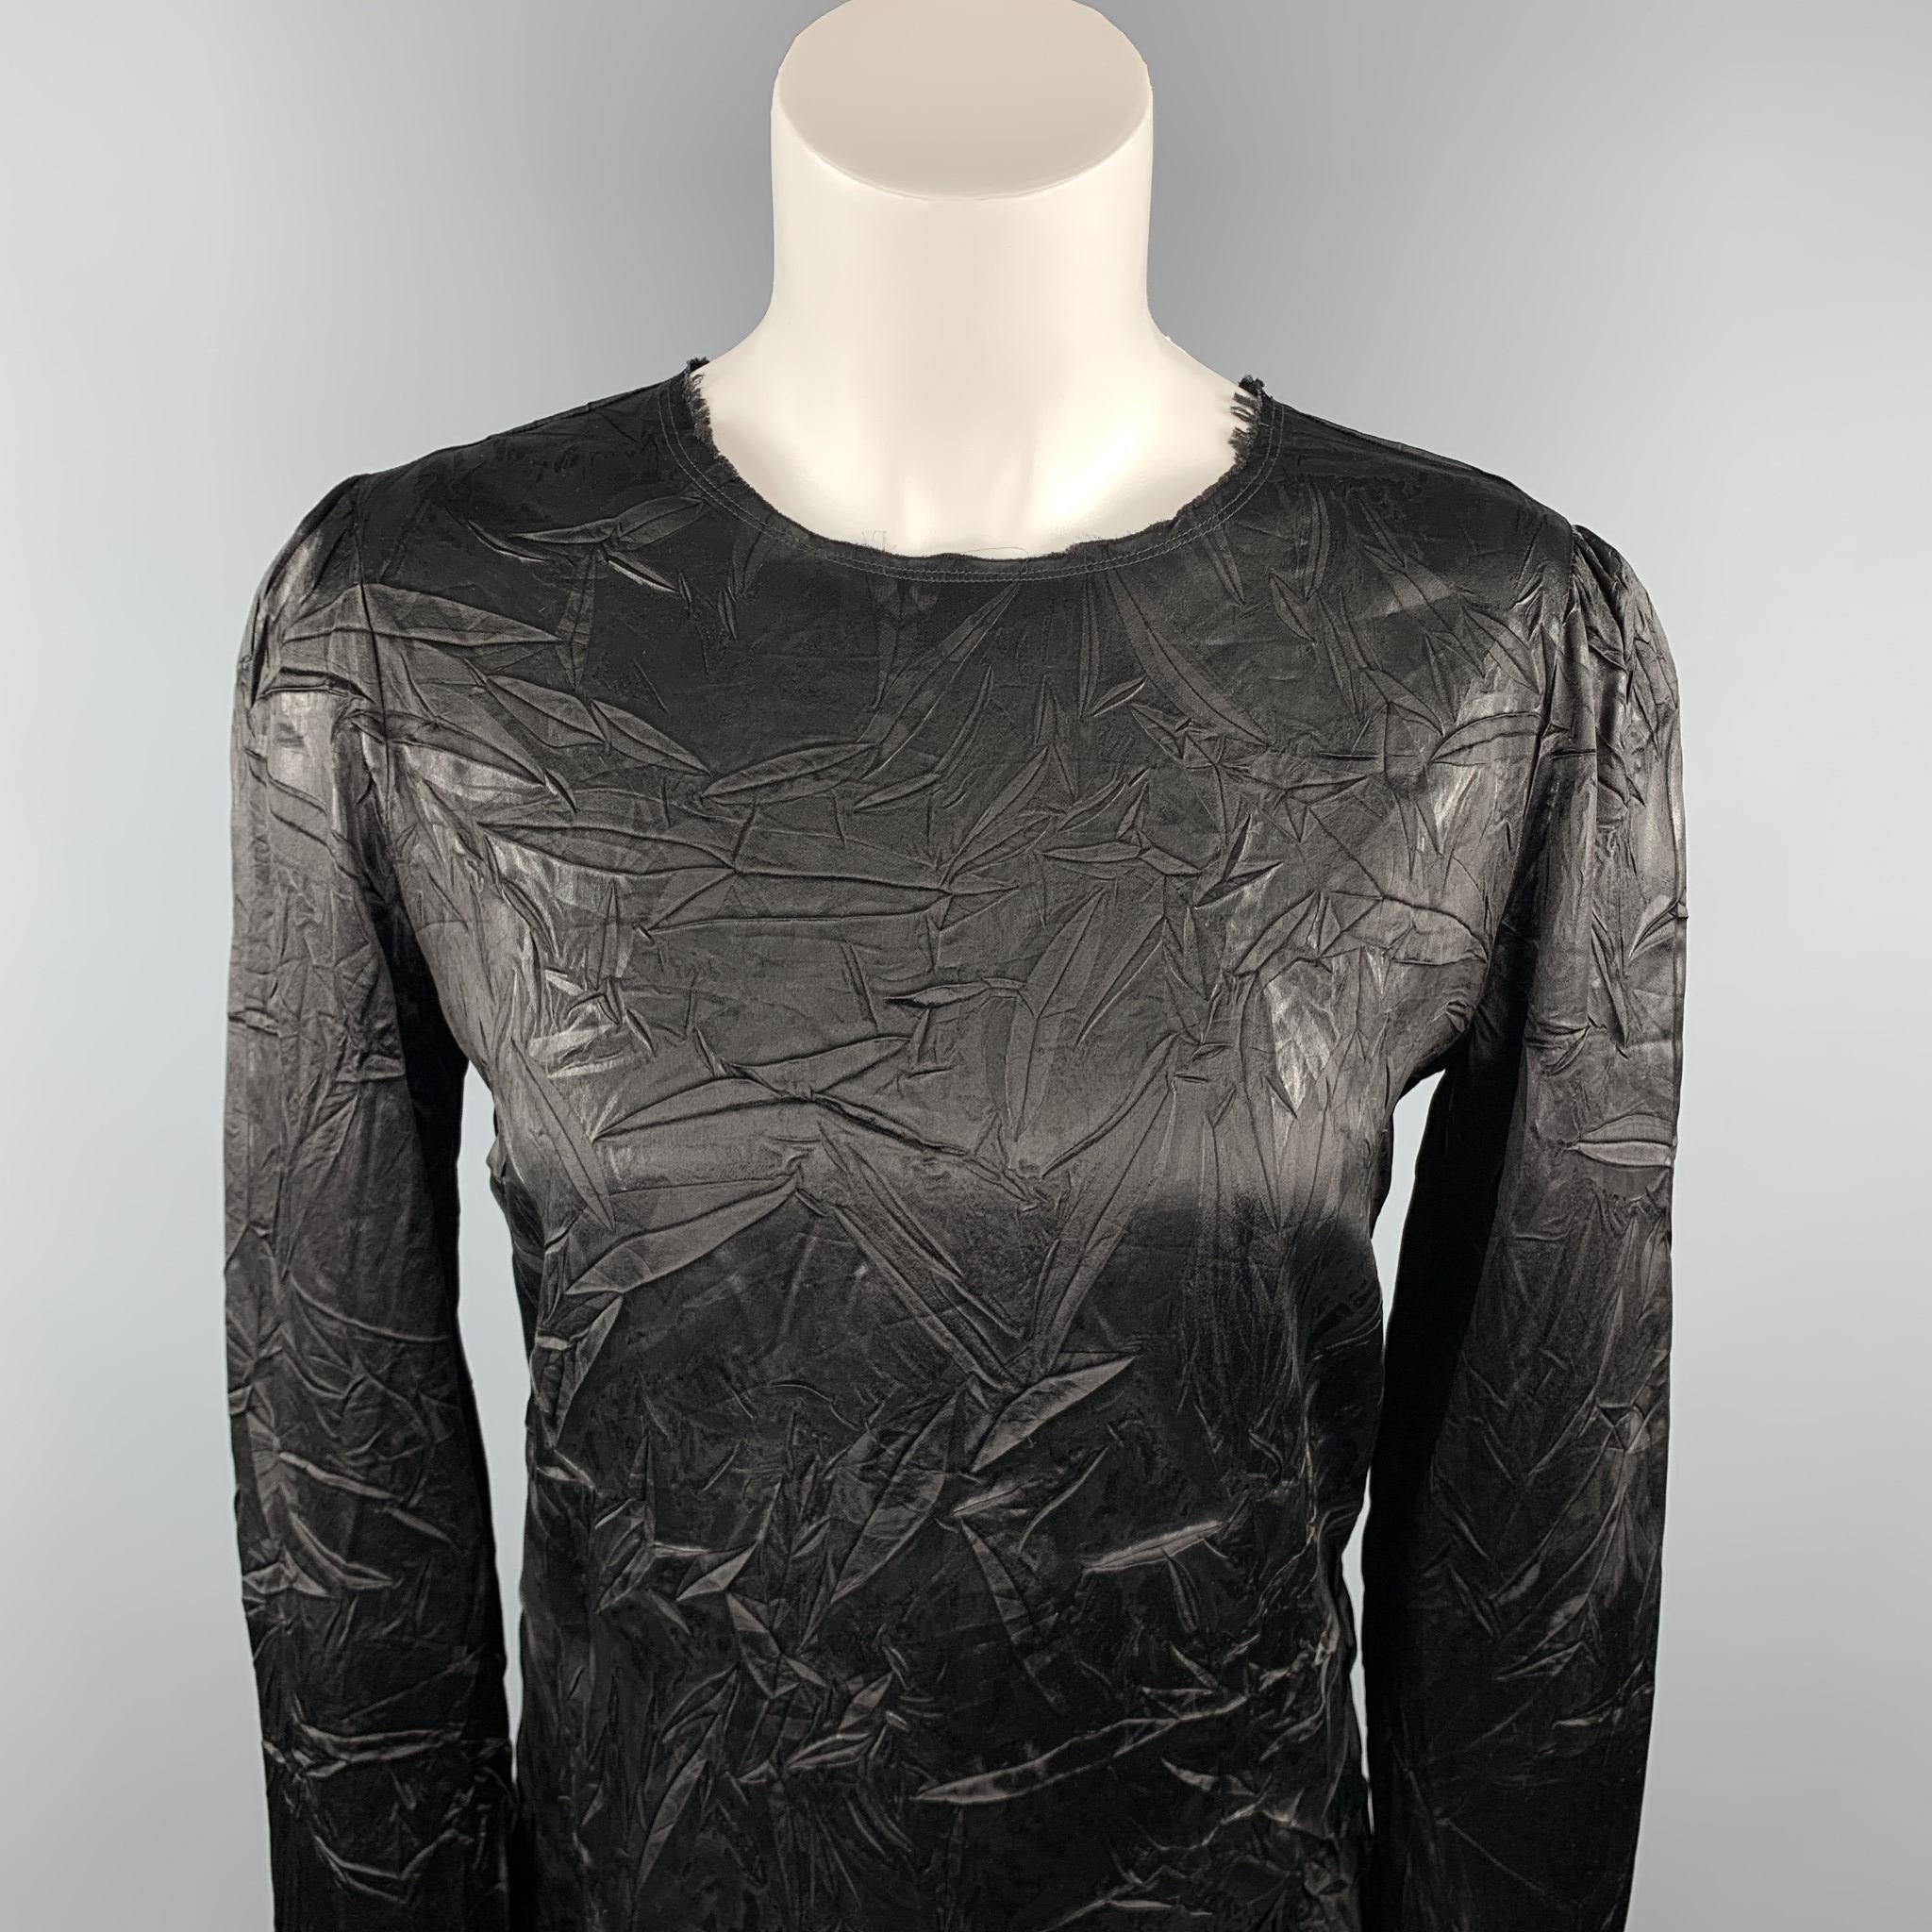 MAISON MARTIN MARGIELA blouse comes in a black acetate / viscose with a wrinkled design throughout featuring a raw hem neckline and a back zipper closure. Made in Italy.

Excellent Pre-Owned Condition.
Marked: IT 42

Measurements:

Shoulder: 15 in.